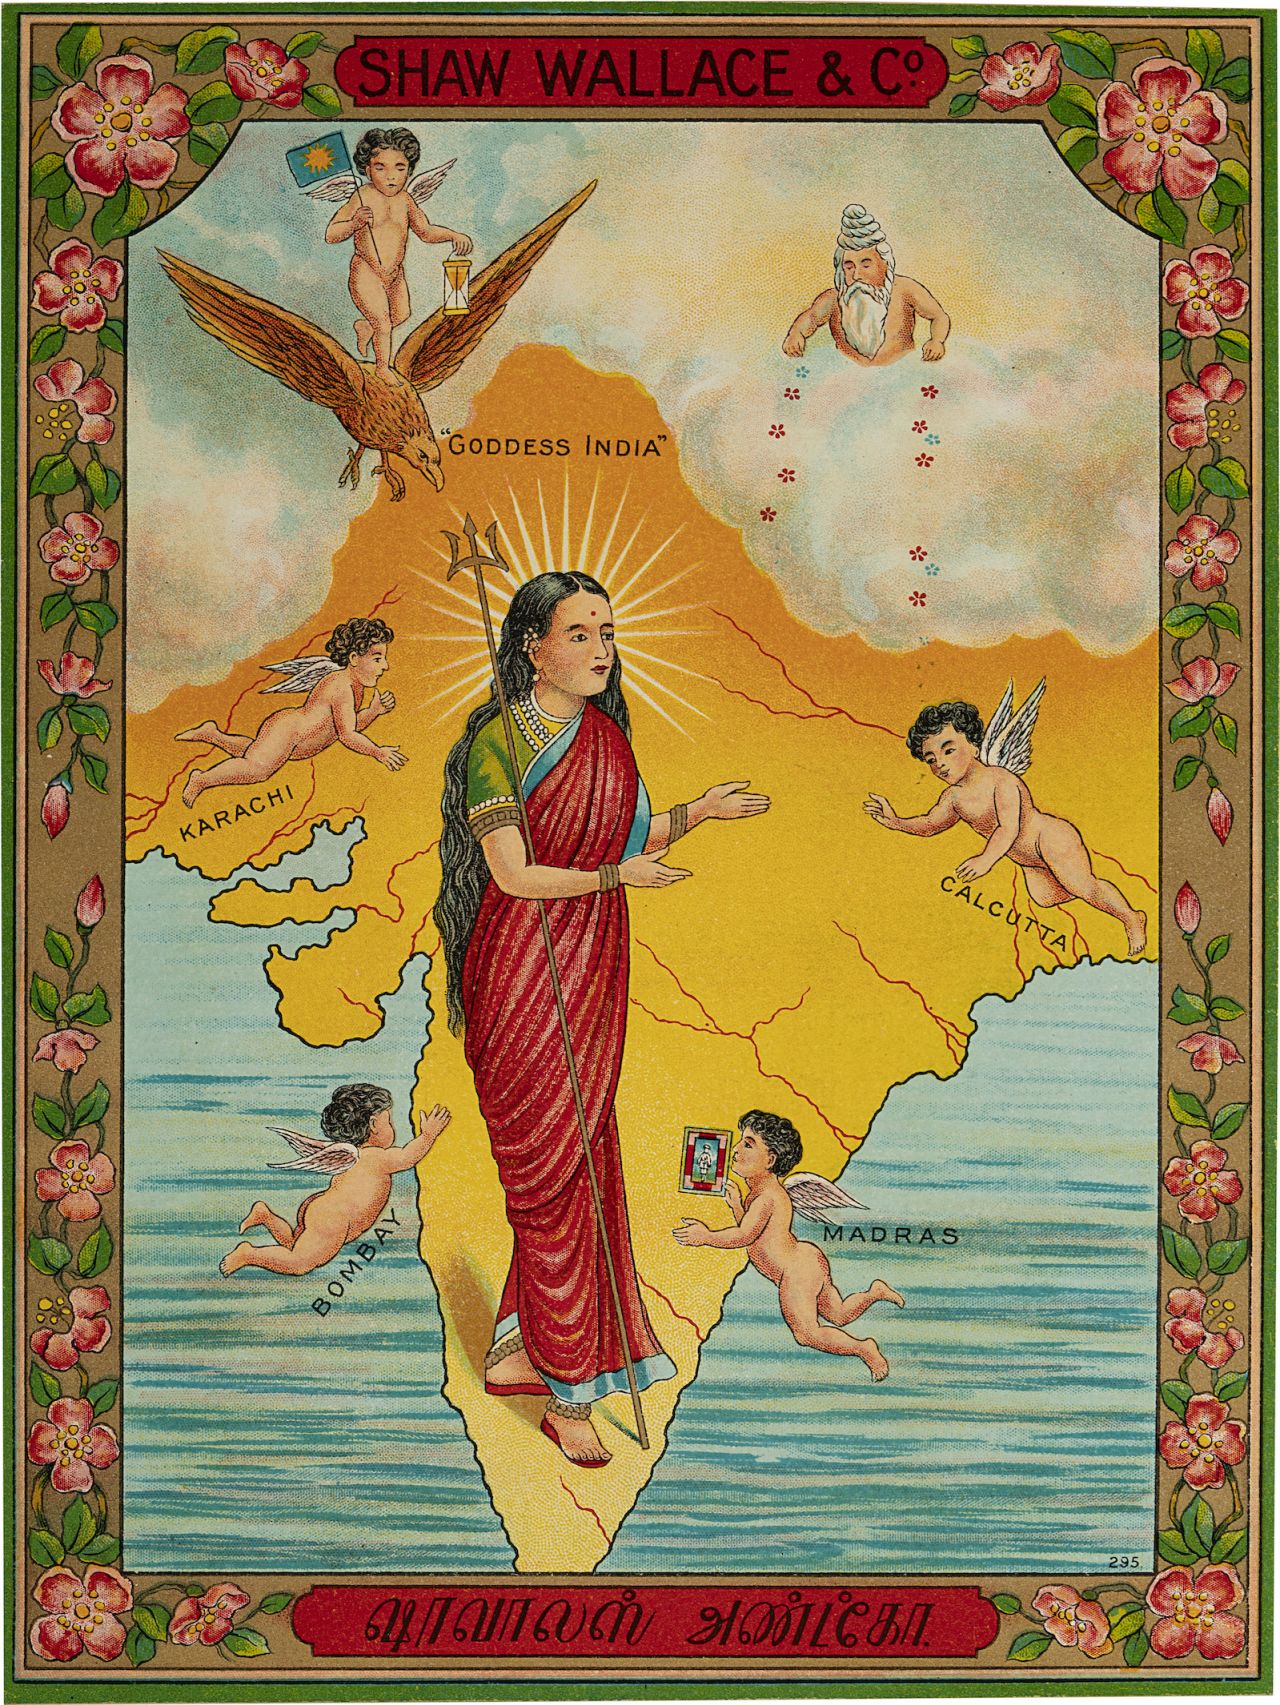 A textile label from the trading company Shaw Wallace, depicting a woman as "Goddess India," is among the examples of everyday design in the show.